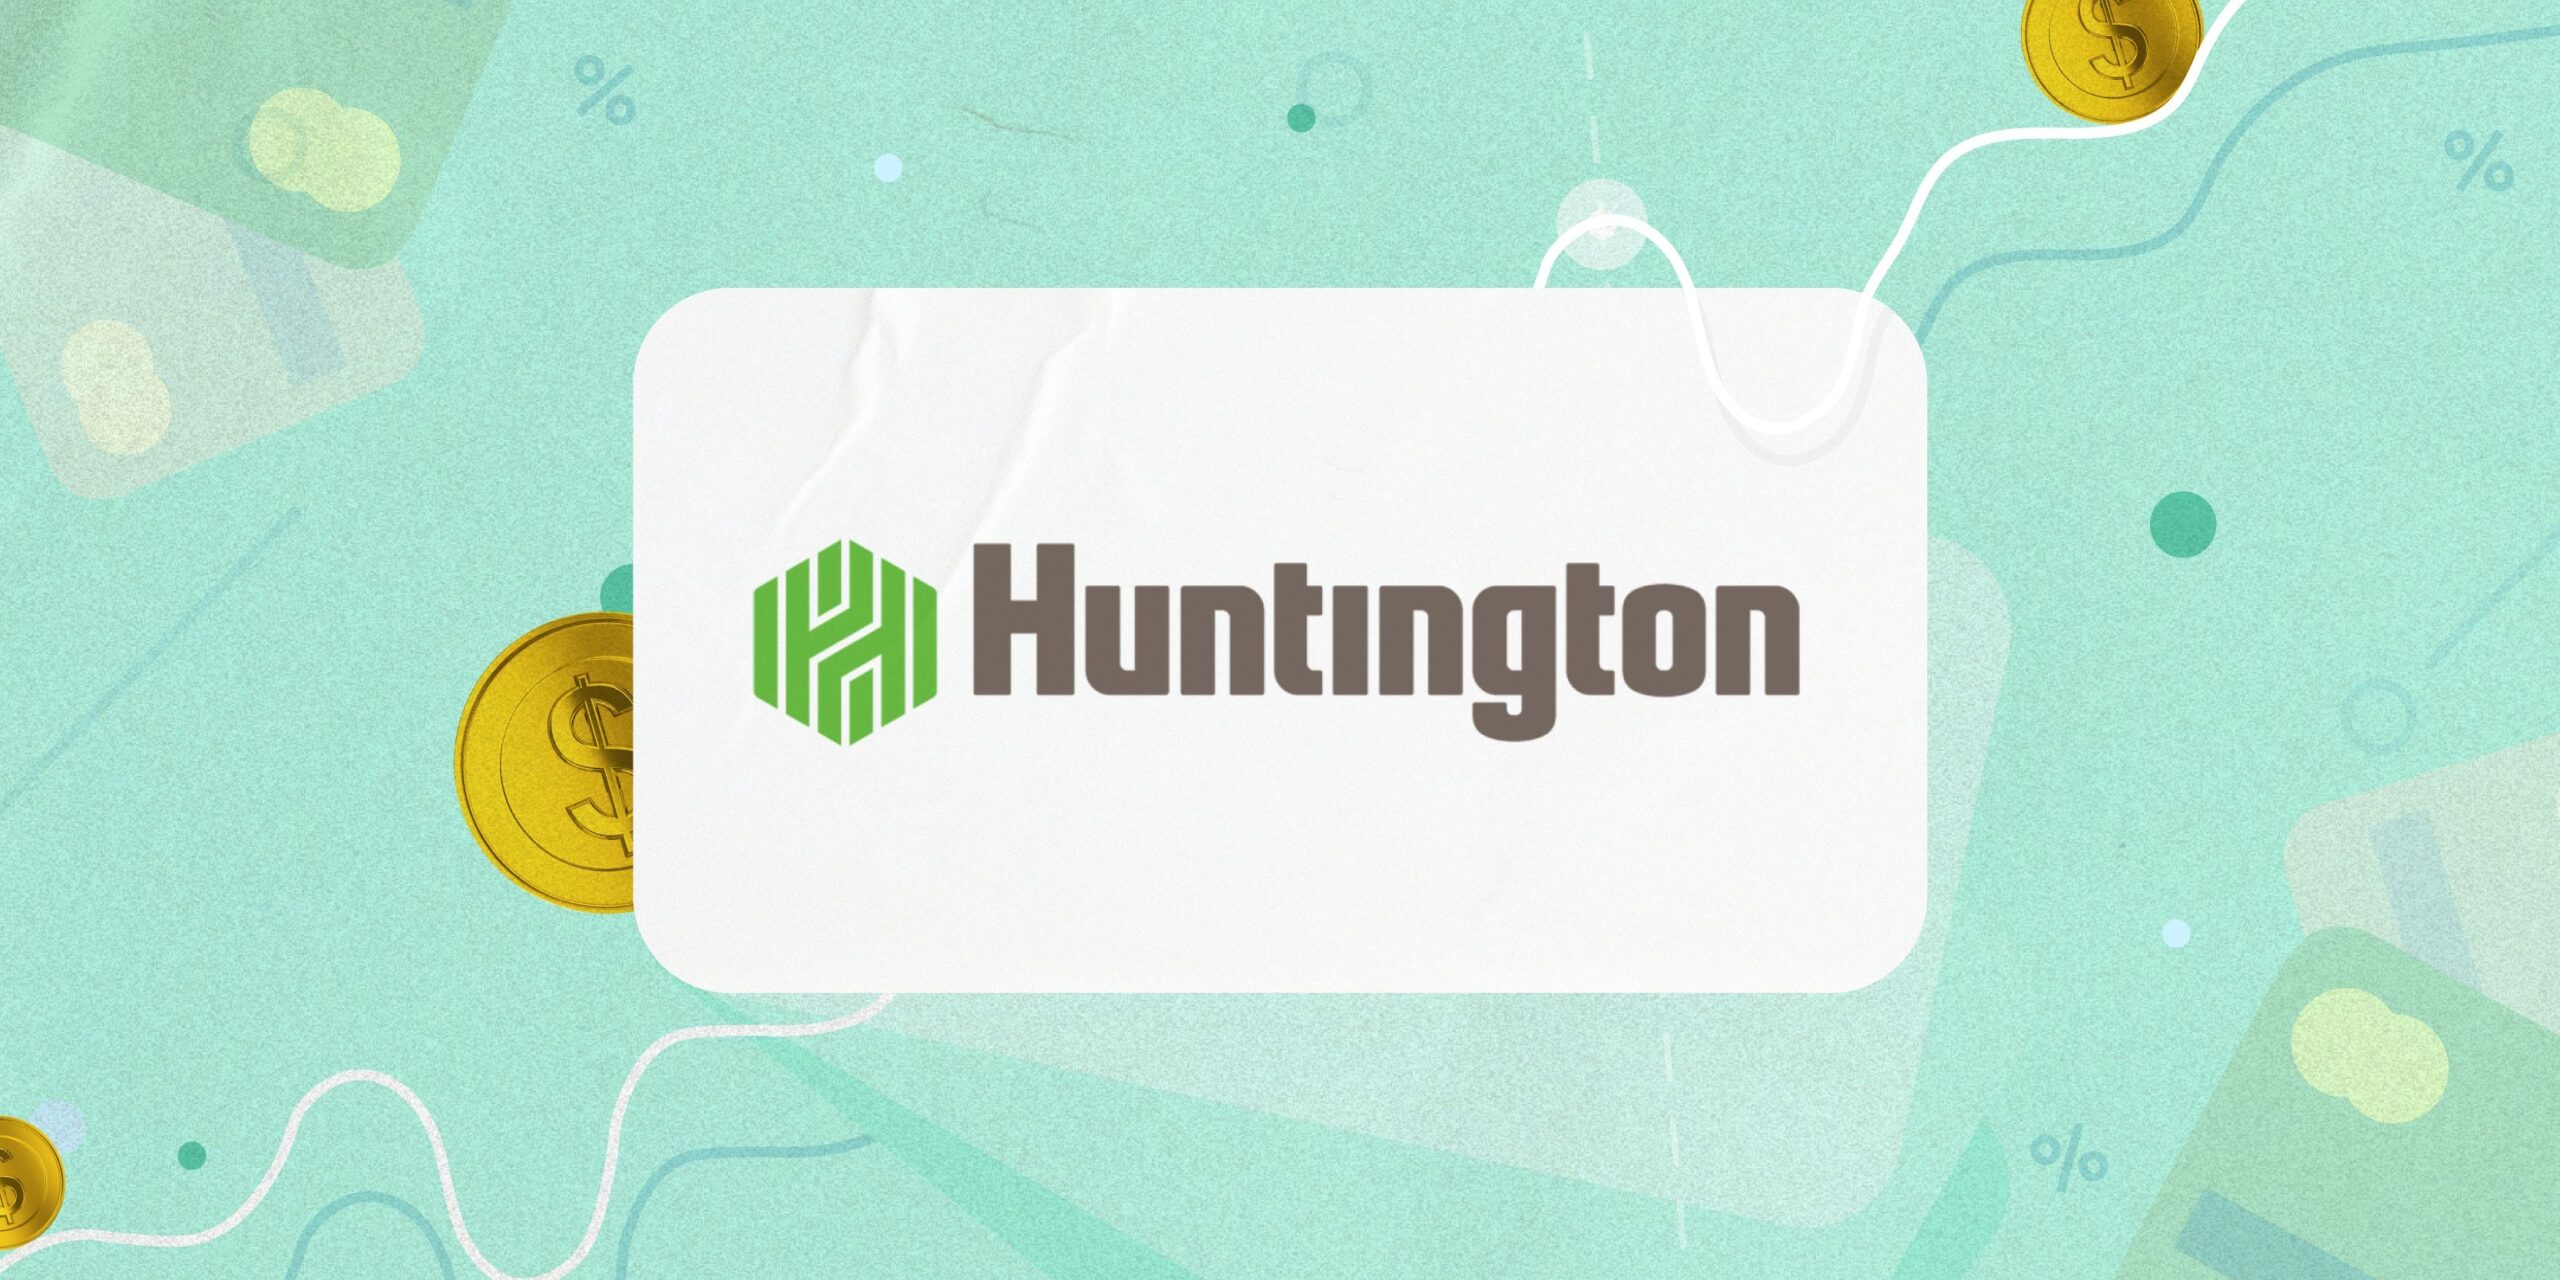 Huntington Bank offers a variety of bank accounts for residents of 7 US